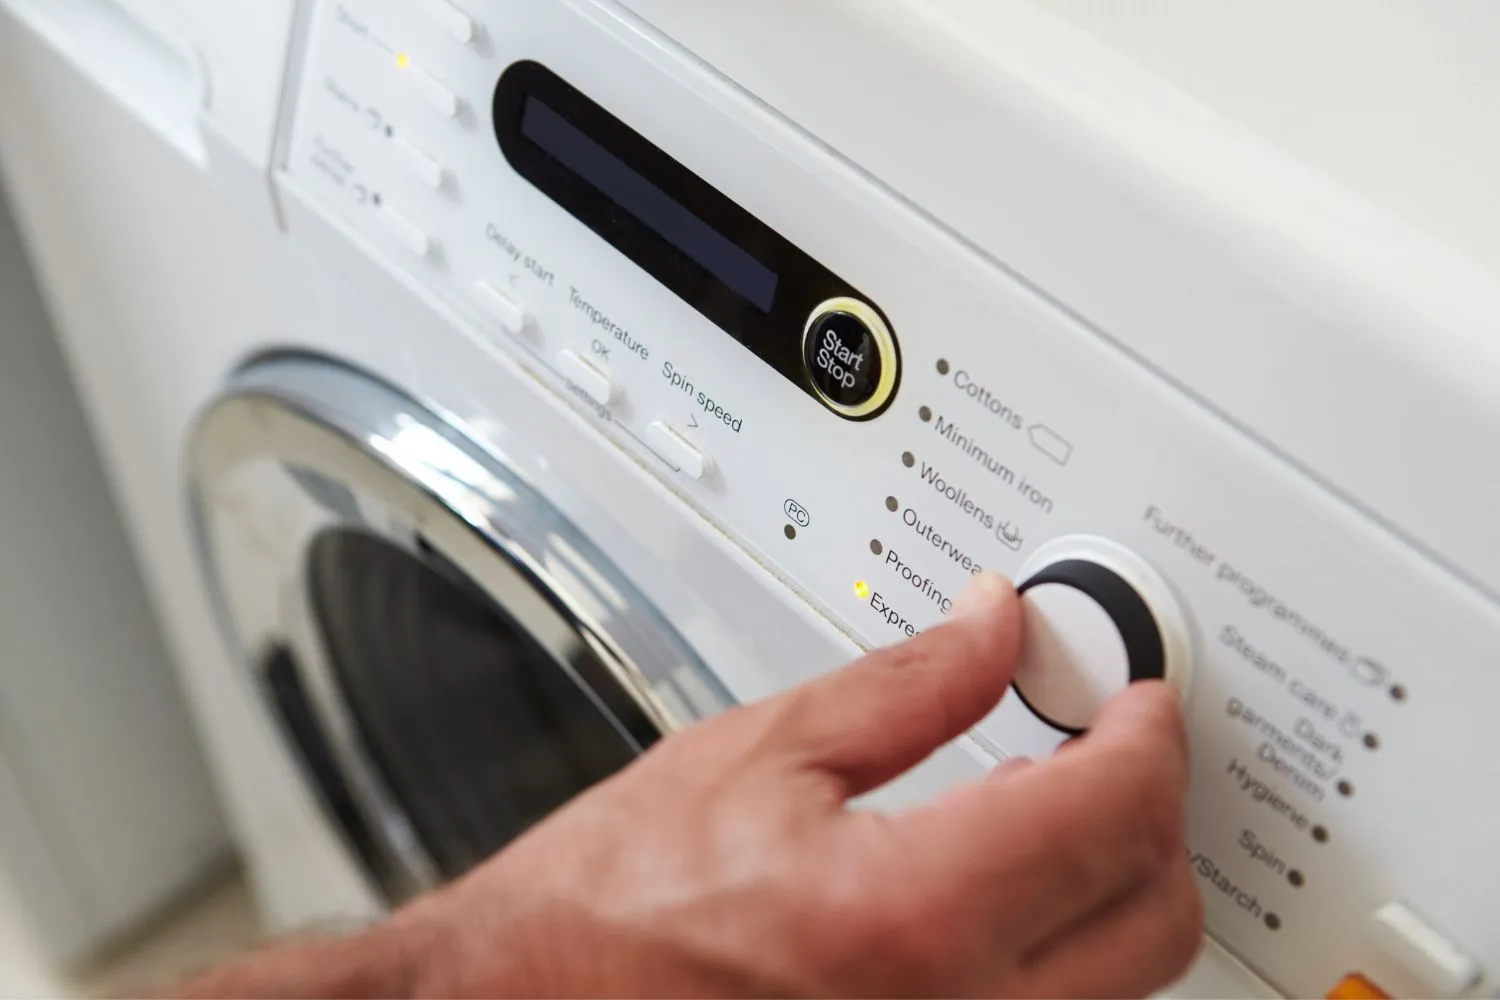 Is A 30 Minute Wash Enough To Get Clothes Properly Clean?